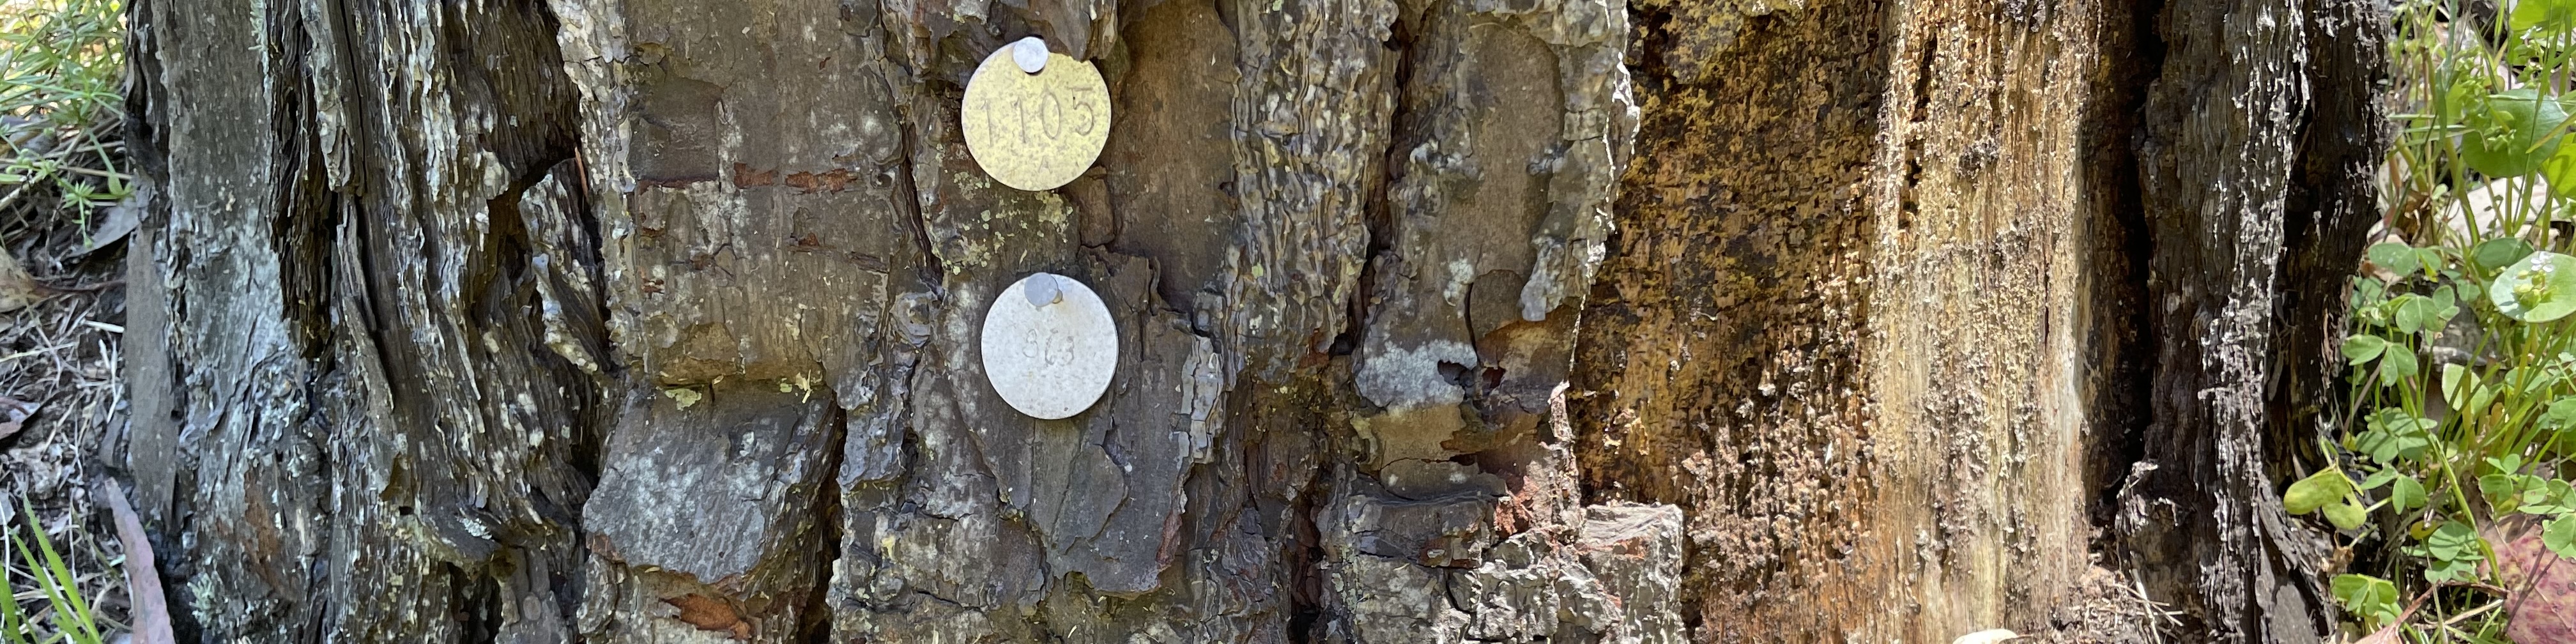 Close up photo of a tree trunk tagged with two circular metal tags.